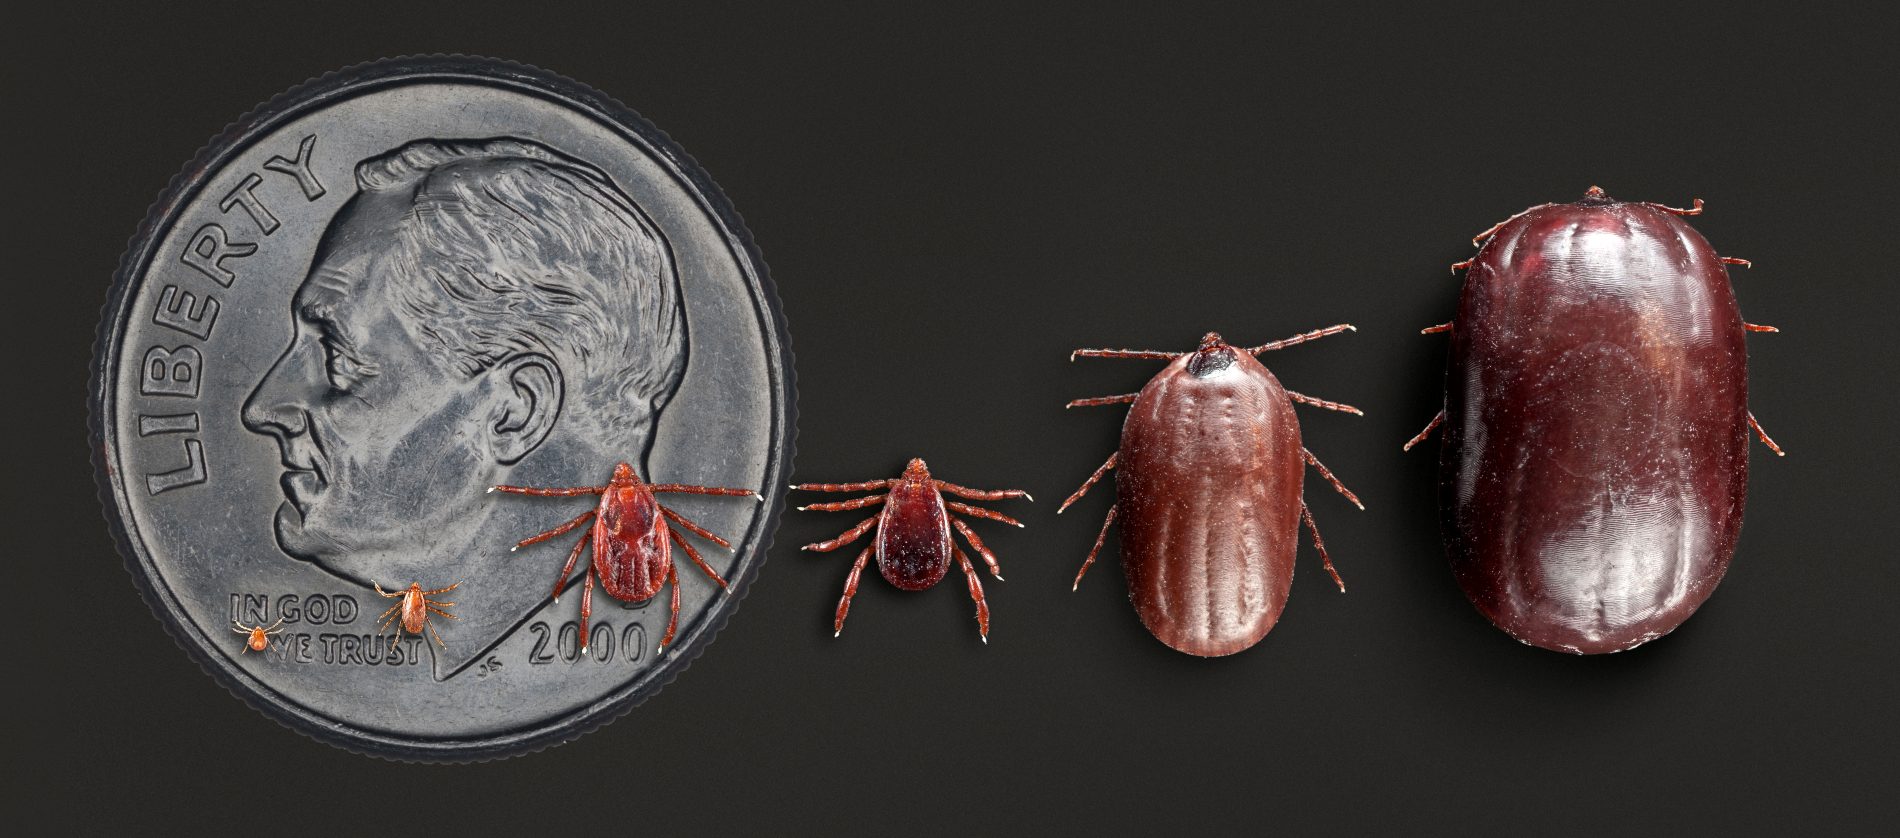 Brown dog tick life stages and engorgement, CDC photo